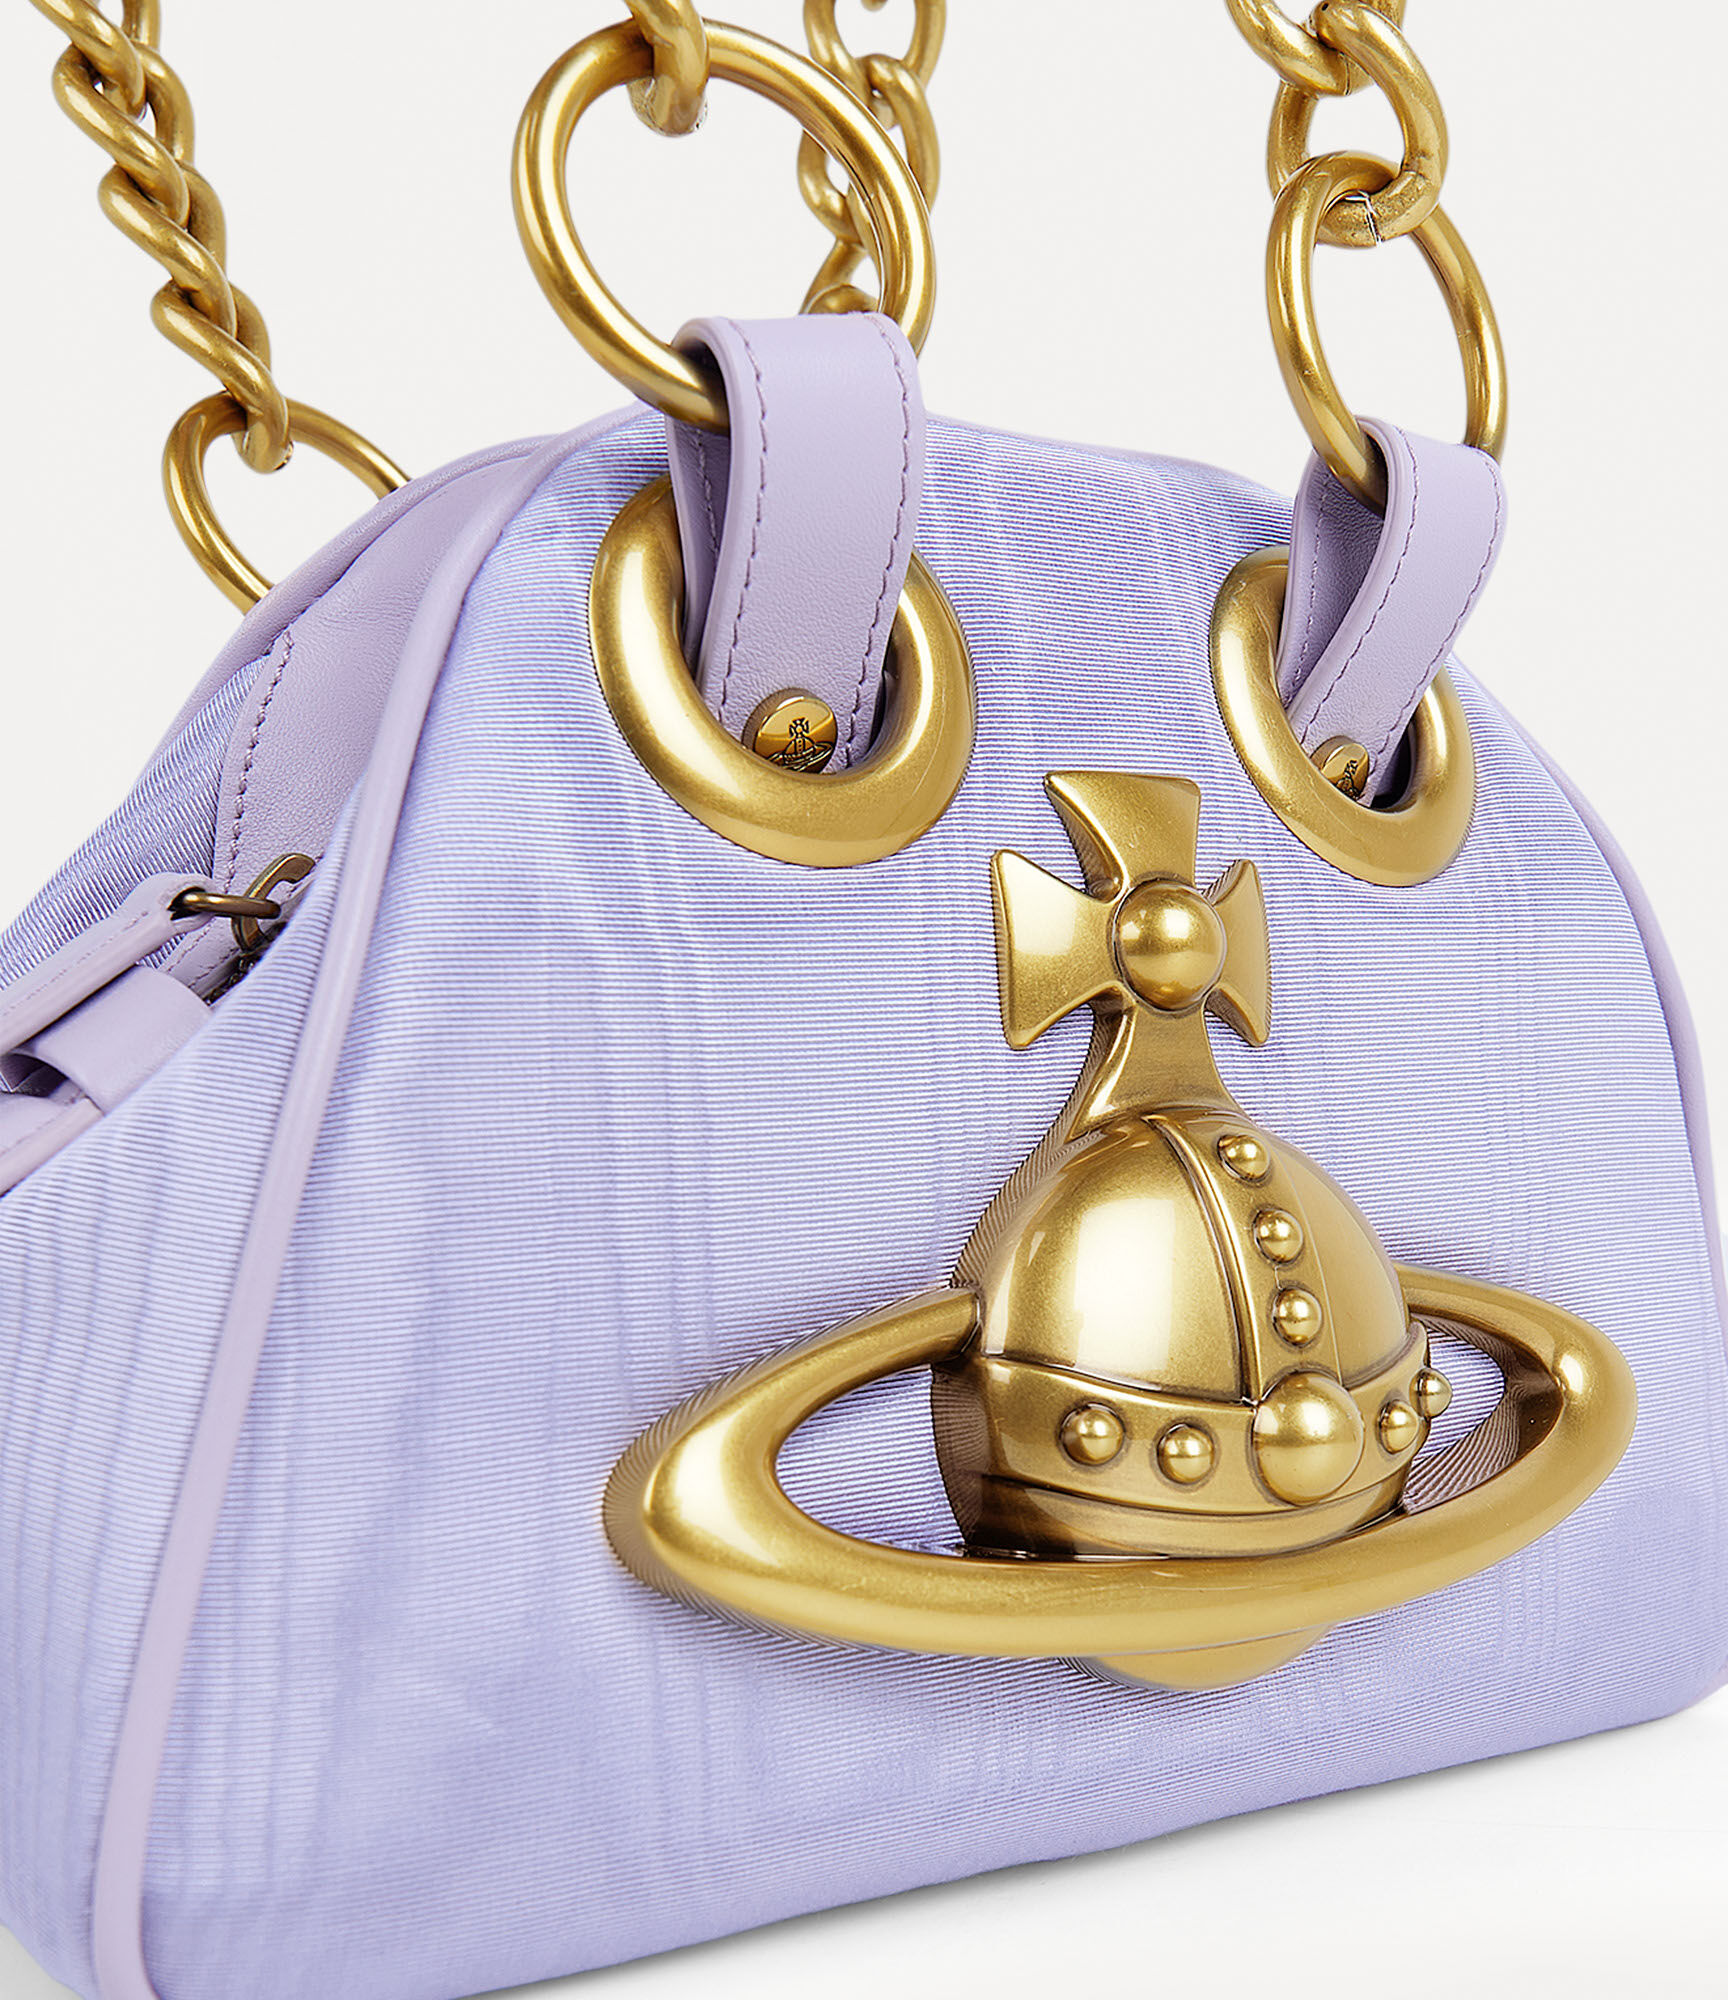 Archive Orb Chain Handbag in LILAC | Vivienne Westwood®